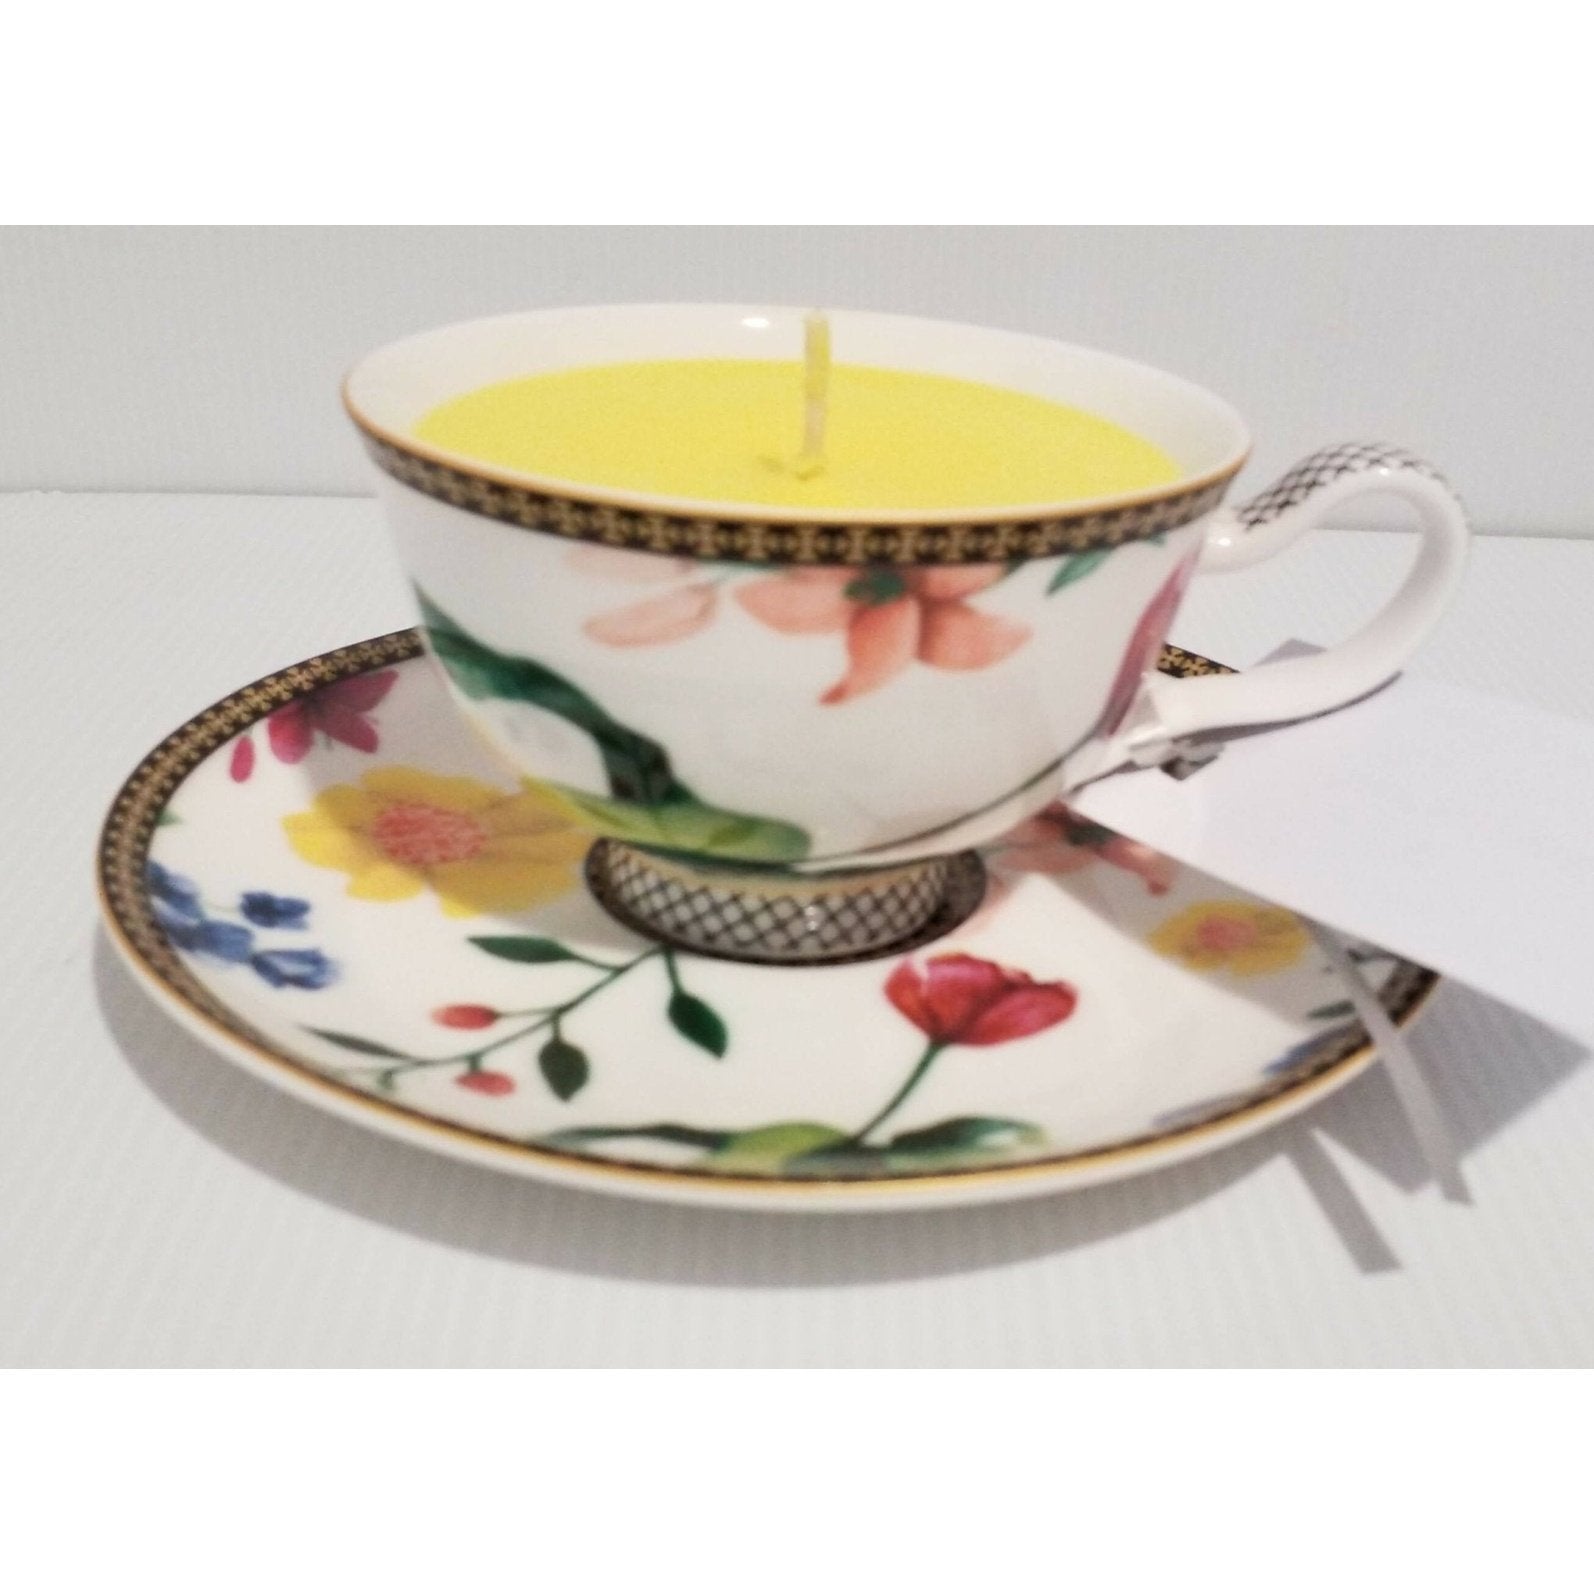 Teacup Candle - Soy Candle - Lotus Flower Fragrance - Free Shipping - AMD Touring